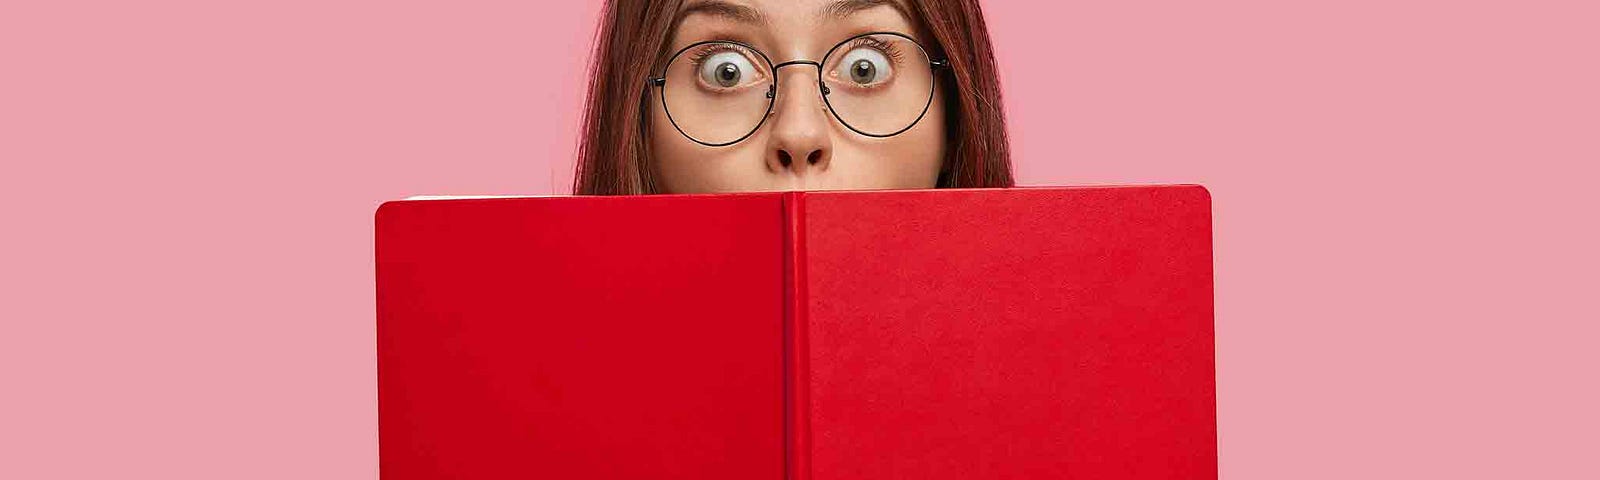 Young woman is holding a red book up to her face. It covers her mouth. Her eyes are wide with anticipation.